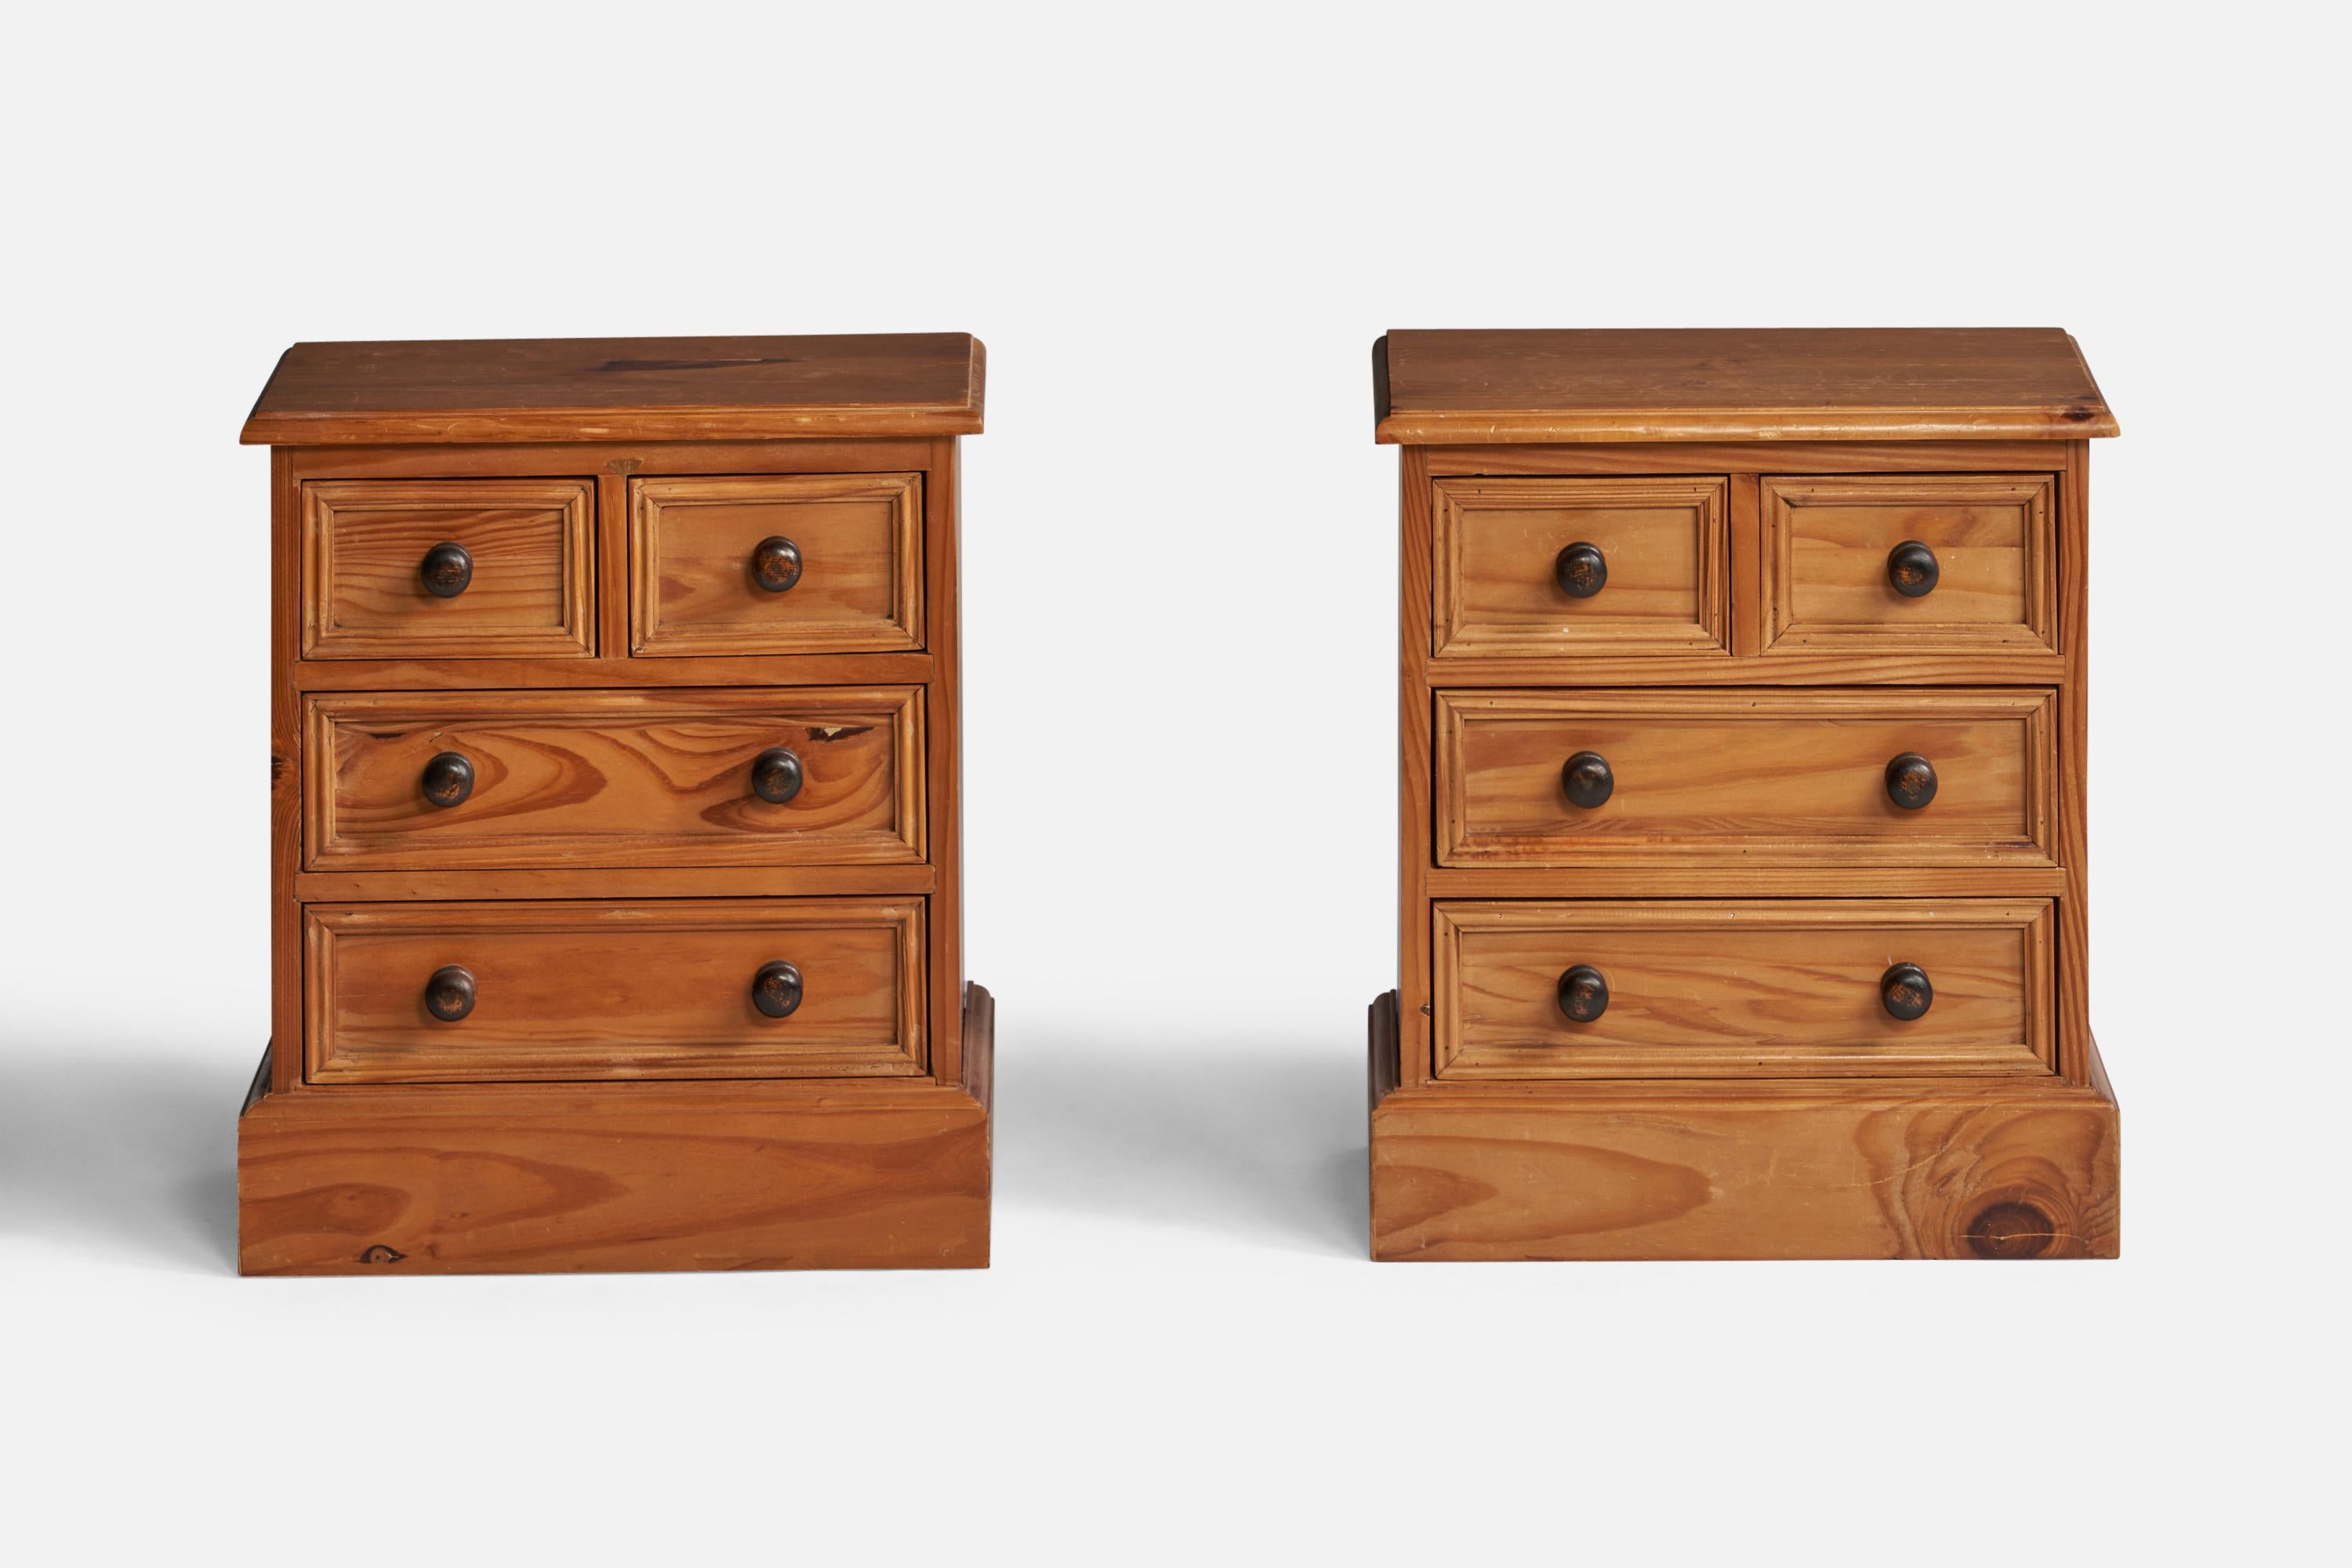 A pair of pine and stained pine nightstands designed and produced in the United Kingdom, c. 1950s.
